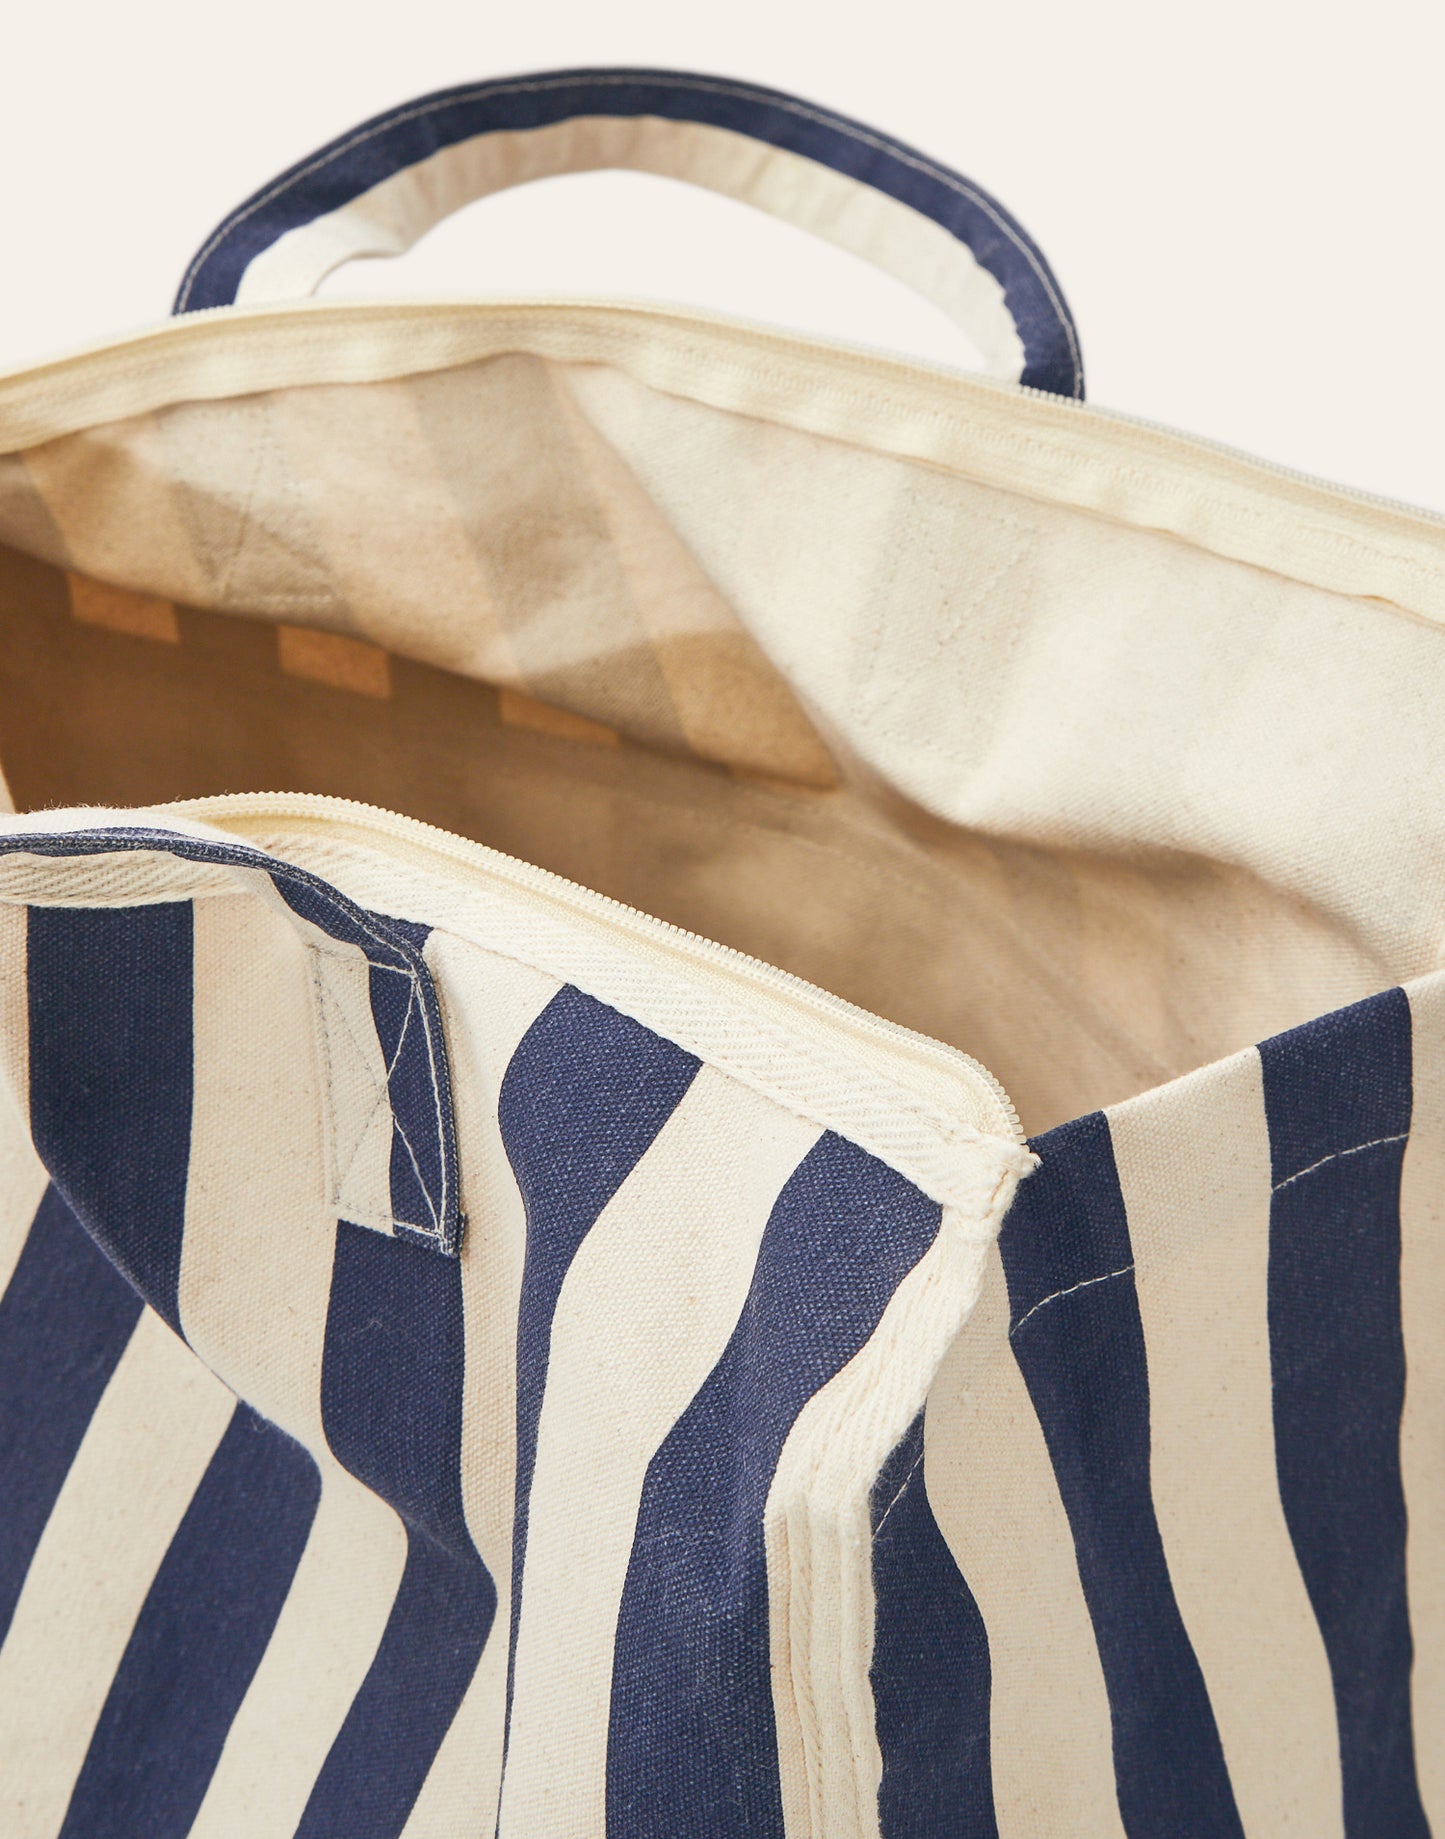 Striped bag with pockets